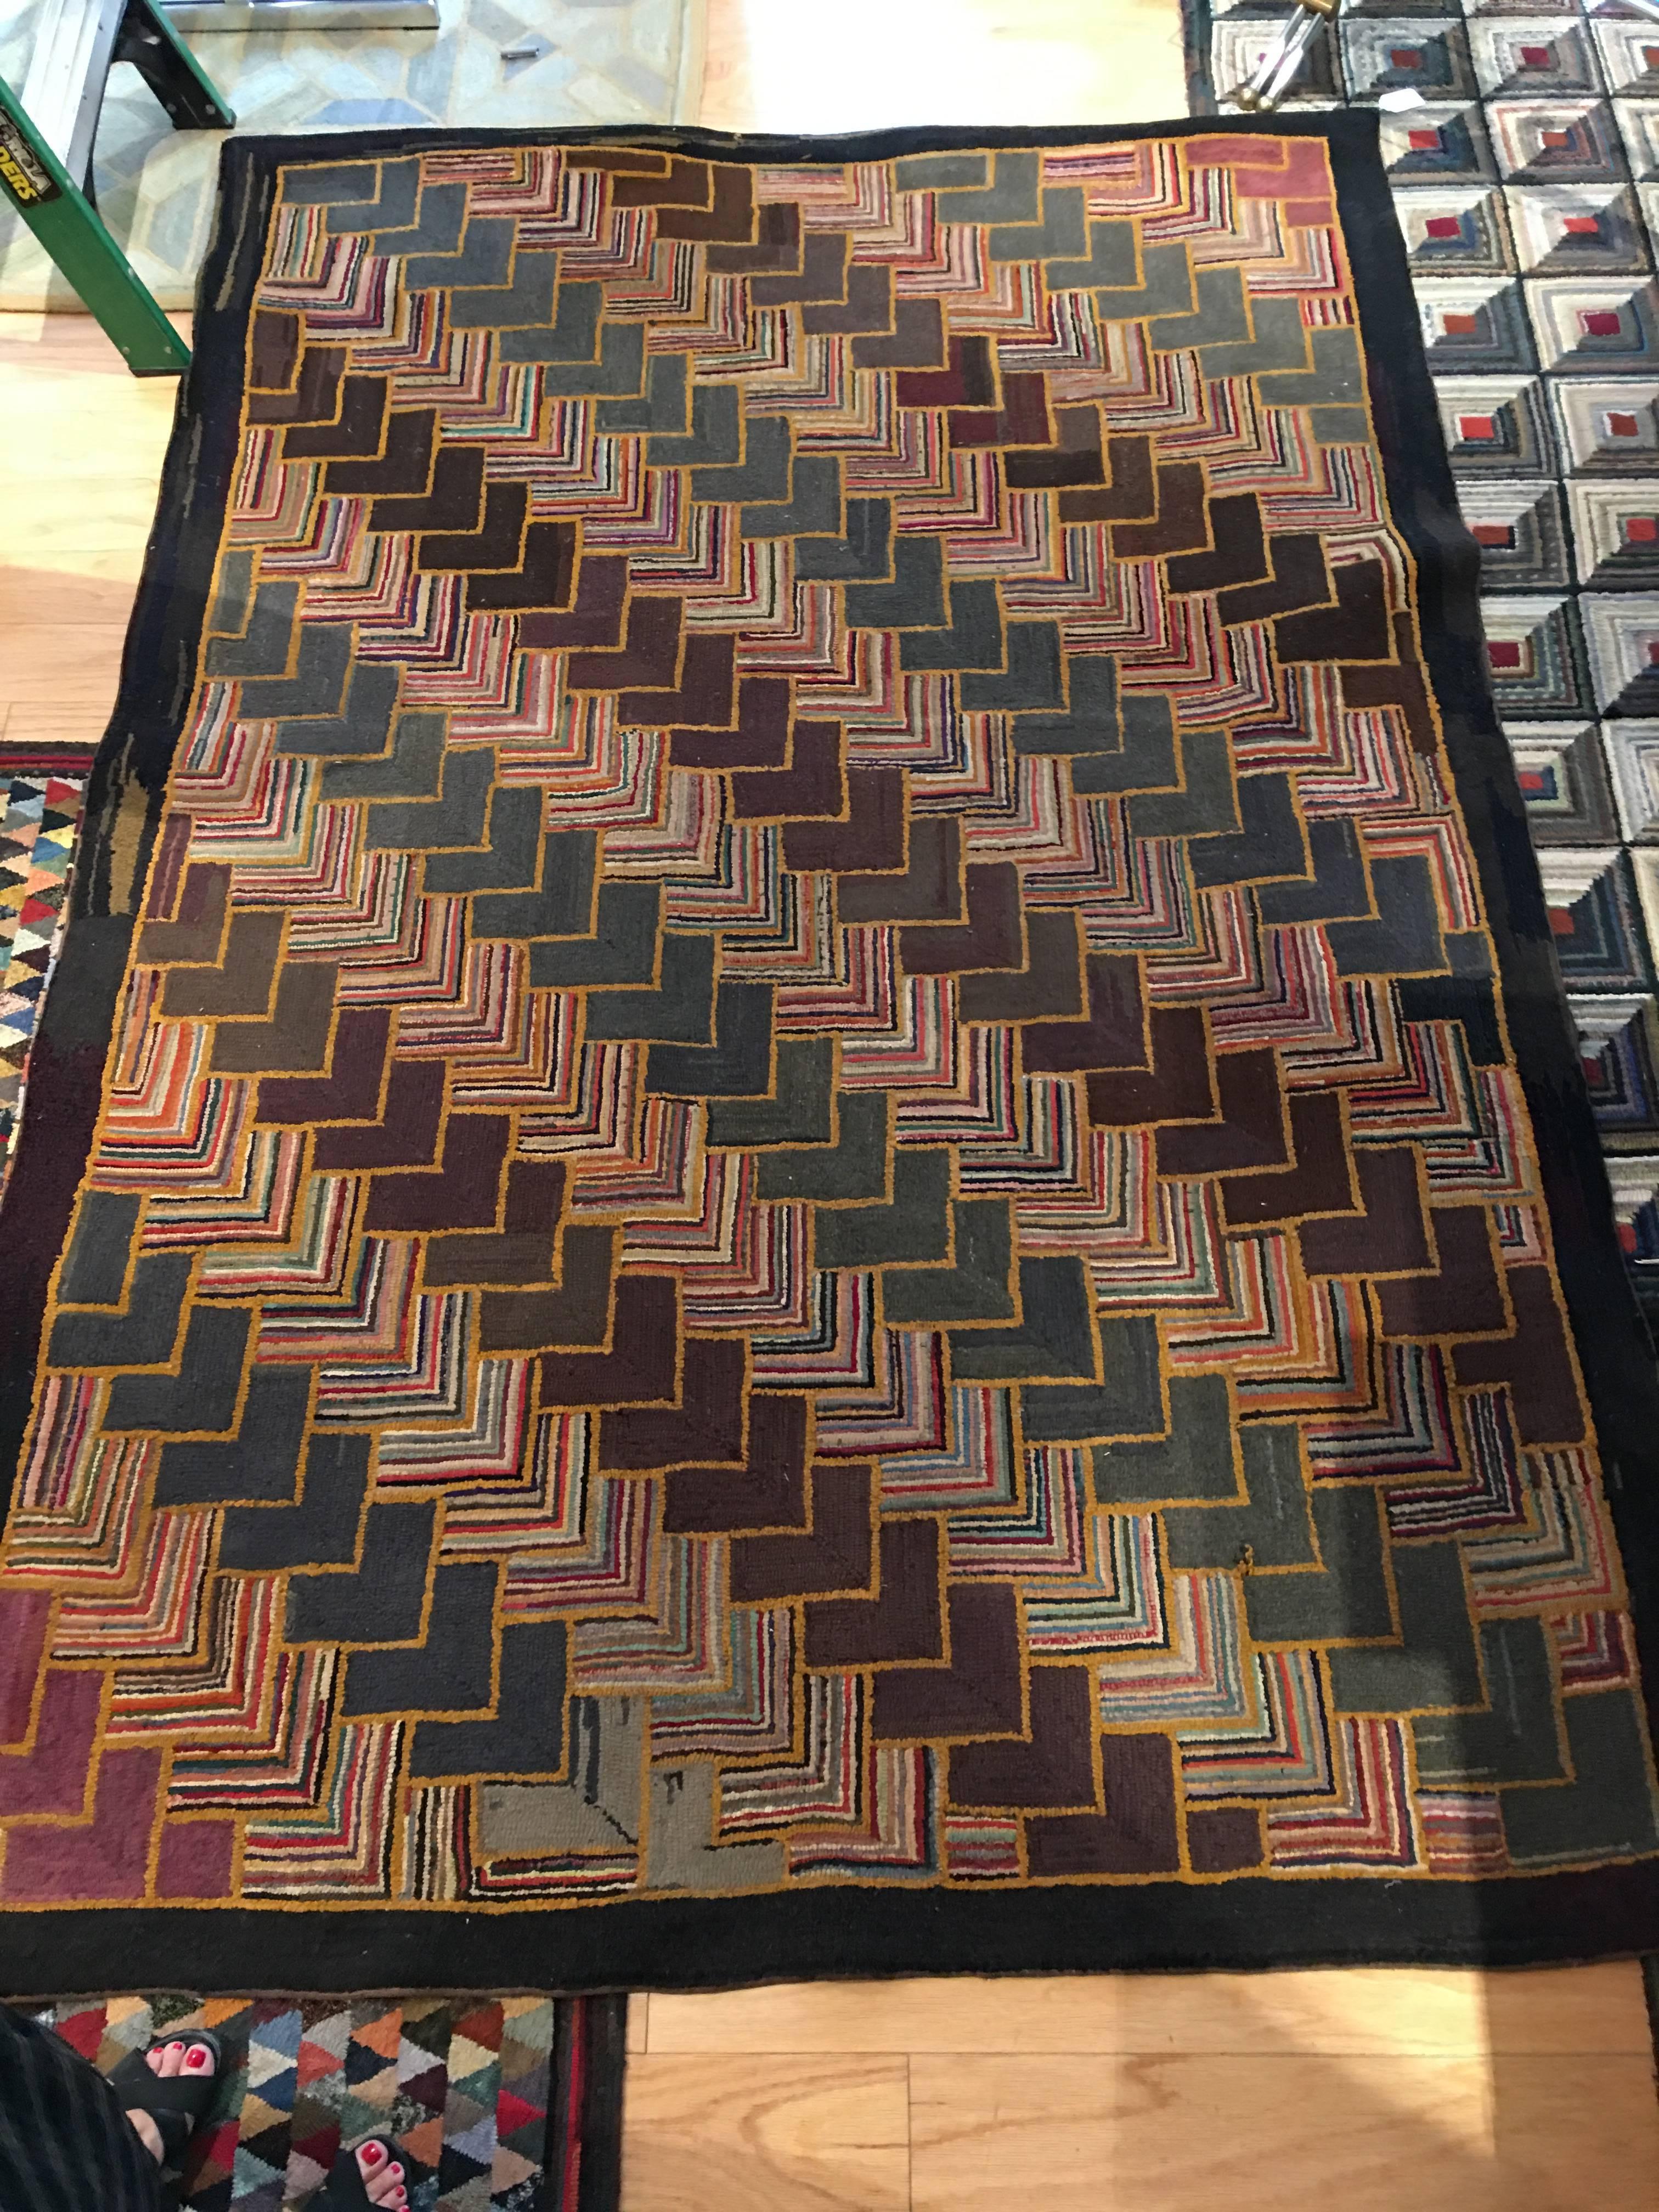 Very fine chevron patterned carpet. In need of binding and restoration which will be offered upon sale. Wonderful soft colors.